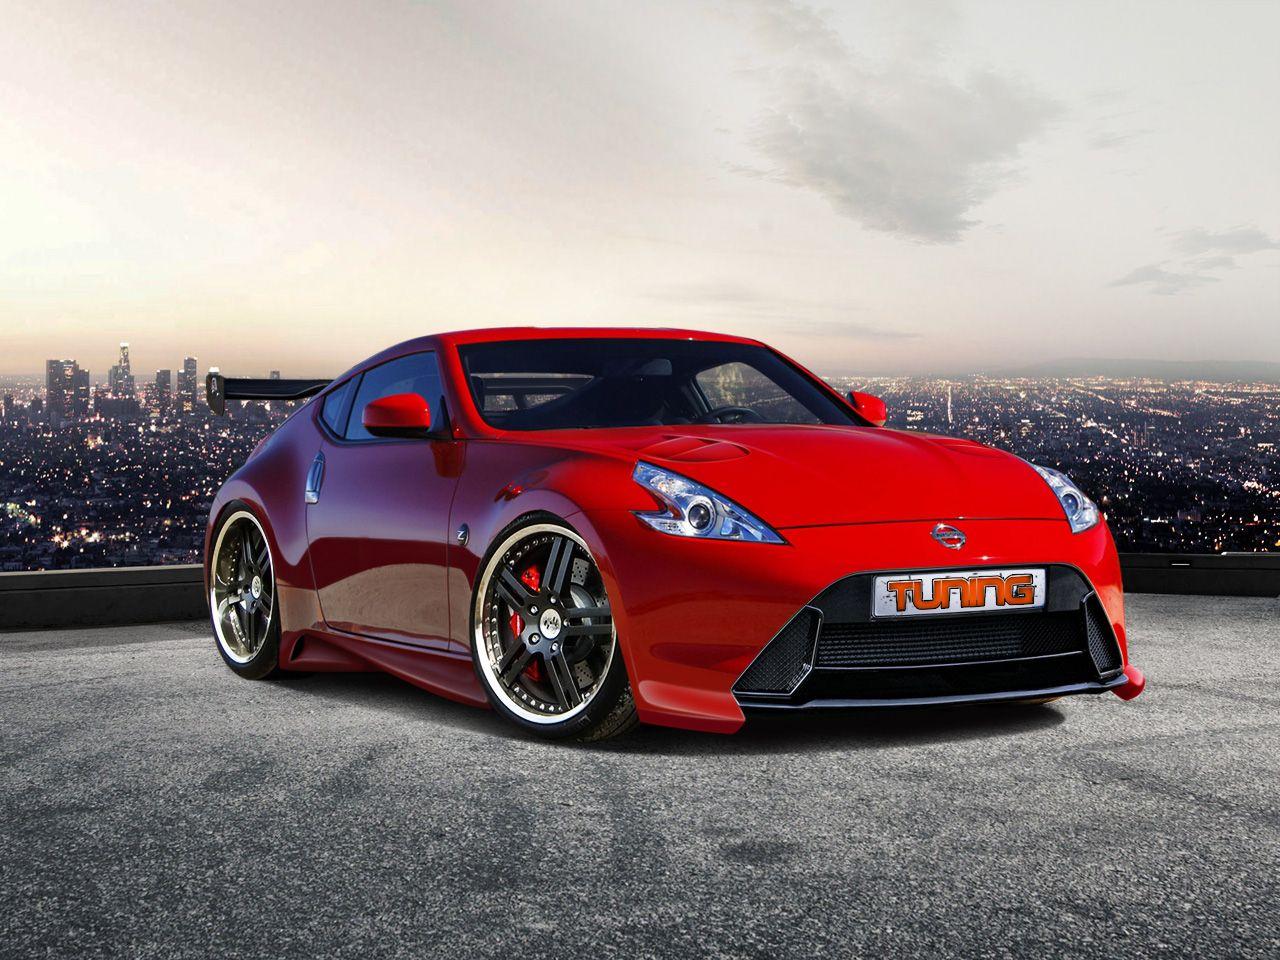 Download wallpaper 1920x1080 nissan 370z nissan car gray tuning road  full hd hdtv fhd 1080p hd background